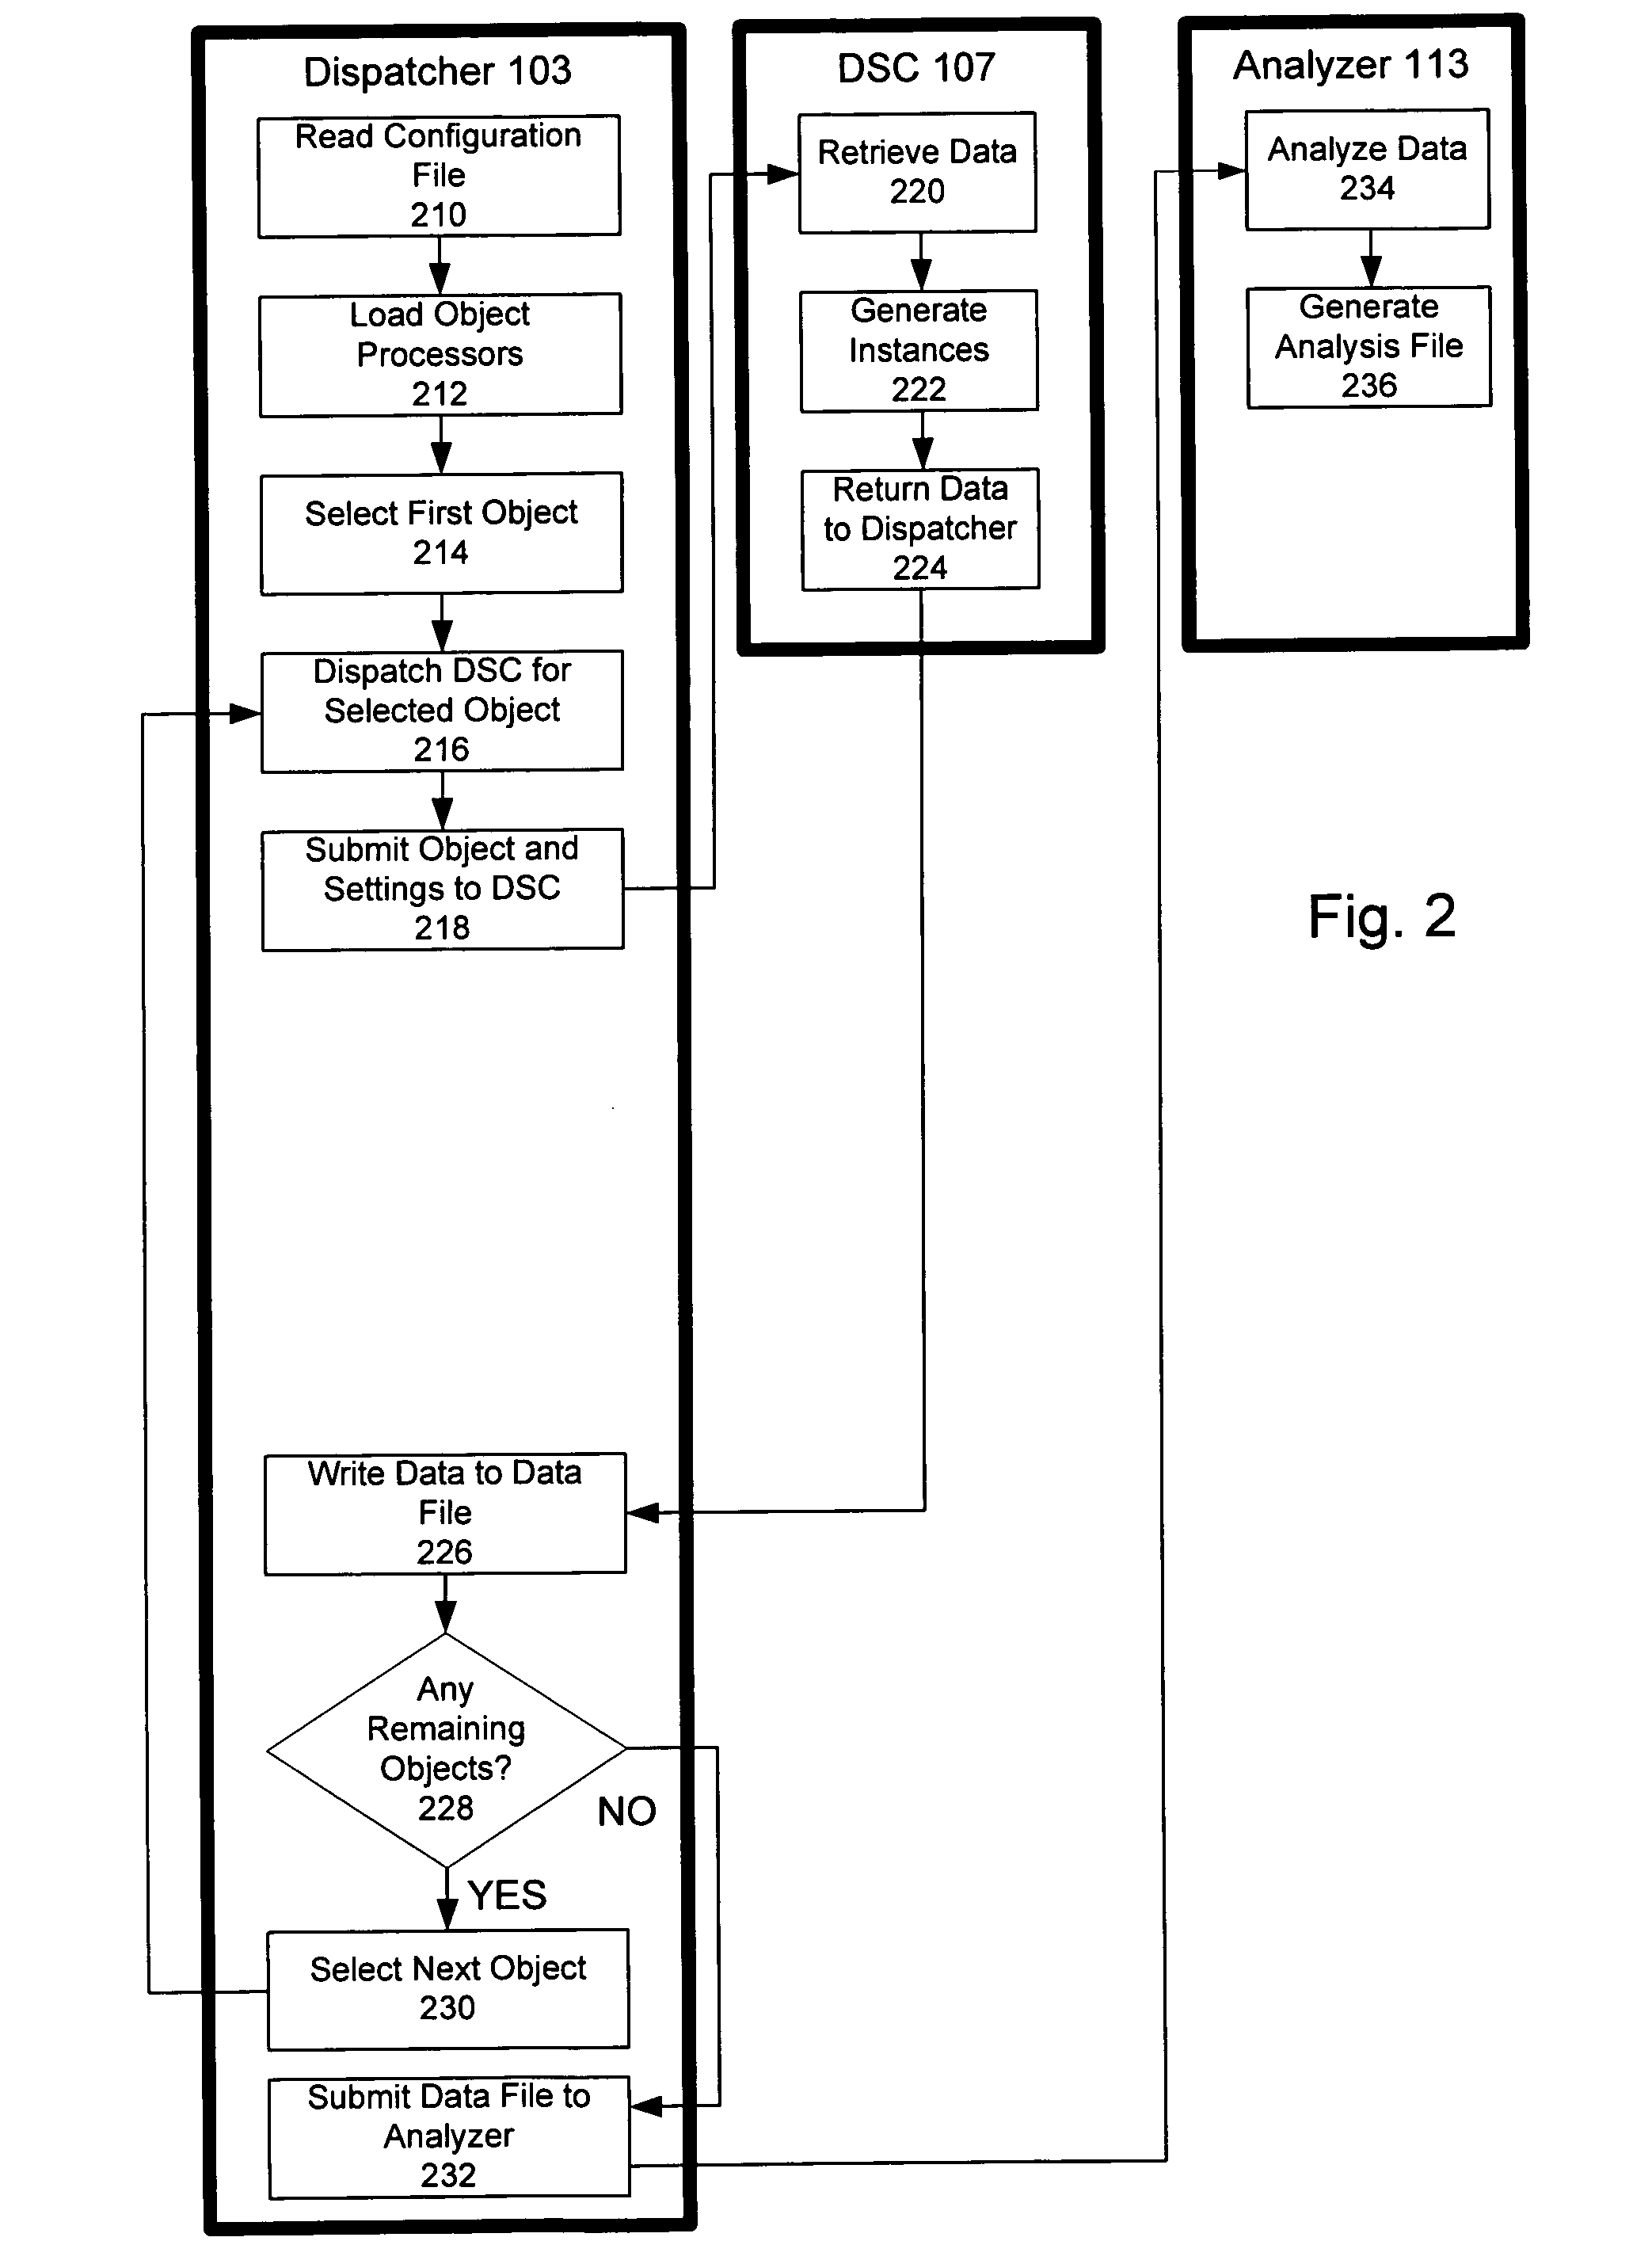 System and method for retrieving and analyzing data from a variety of different sources